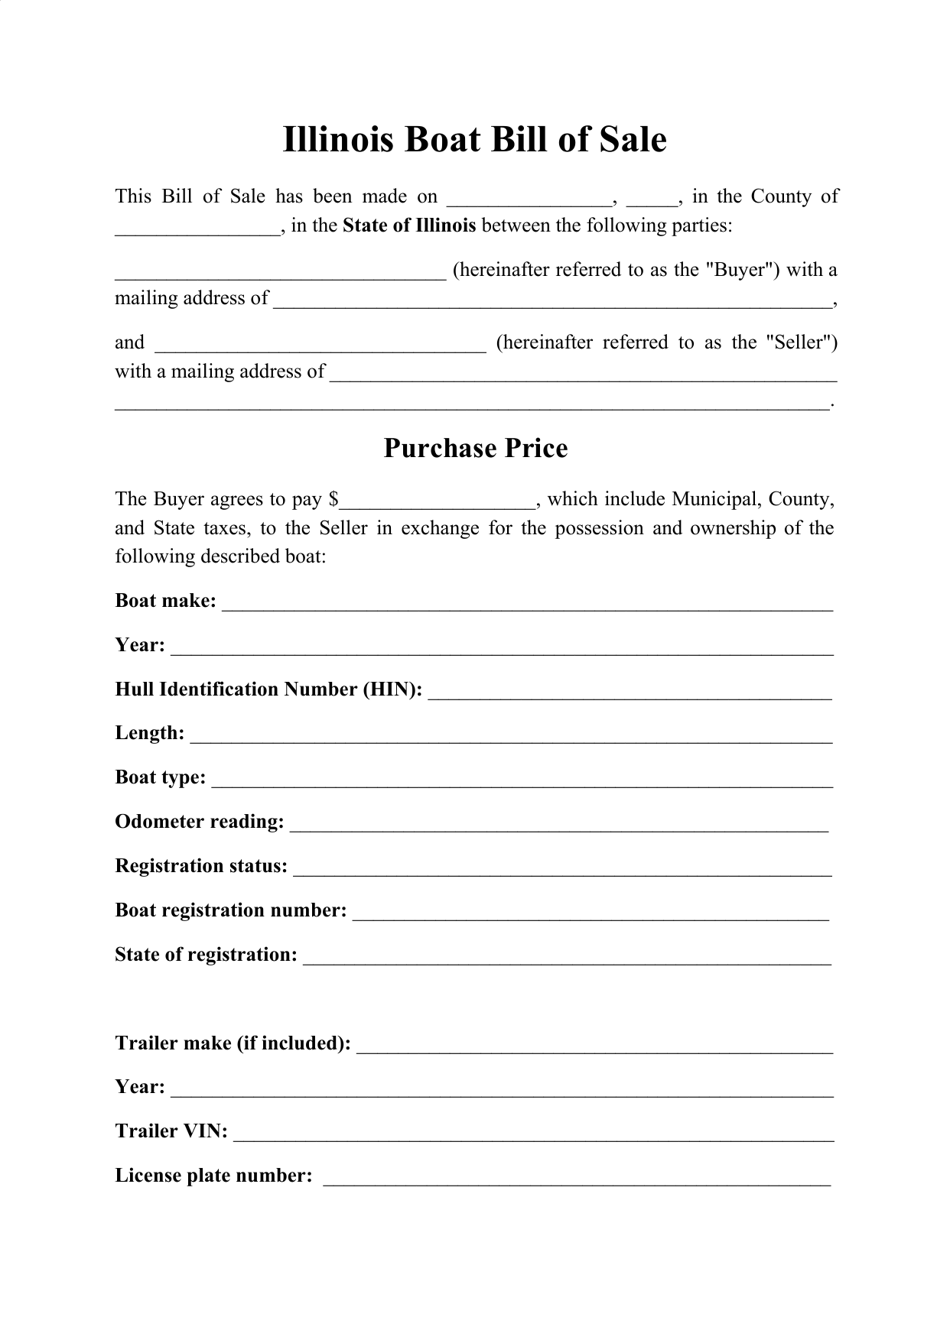 Boat Bill of Sale Form - Illinois, Page 1